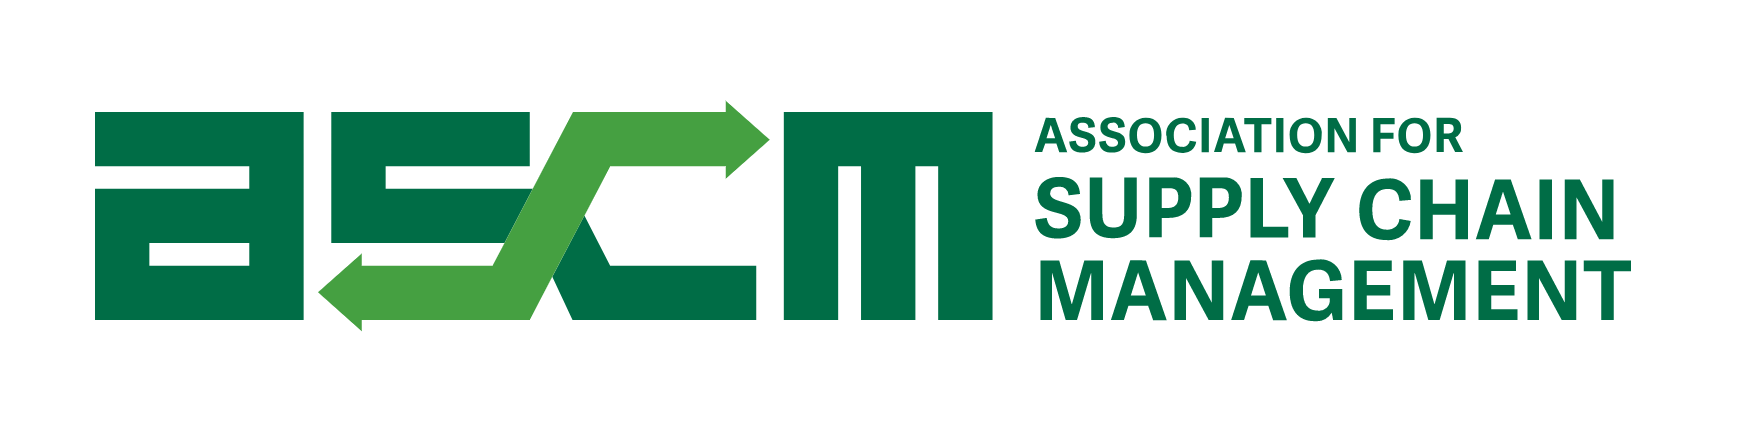  Member of Association for Supply Chain Management (ASCM)